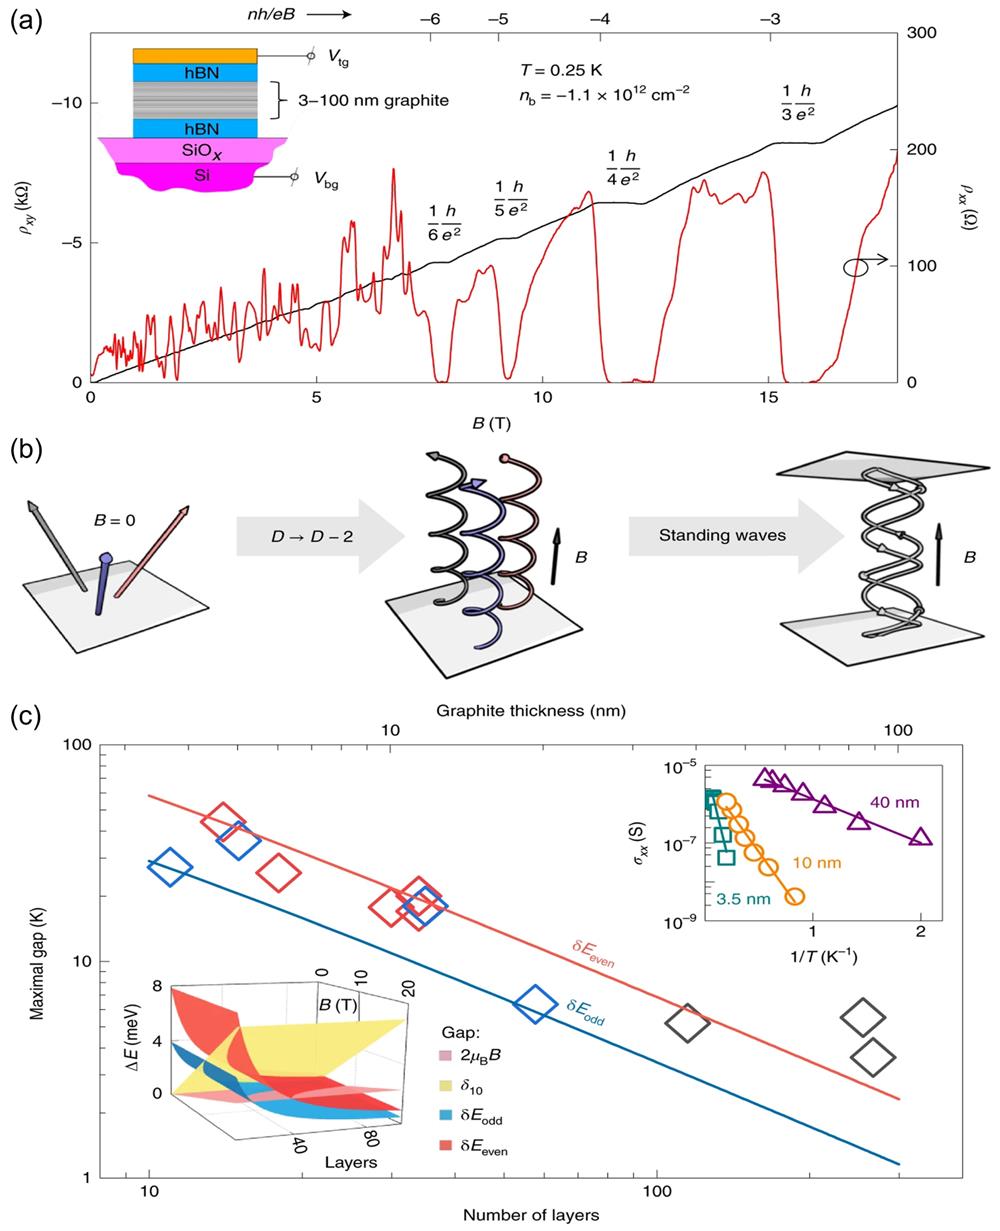 (a) The QHE measured in a 6-nm-thick graphite flake at 0.25 K. (b) Schematic illustrations of electron trajectories under different conditions, (c) Energy gaps for the so-called 2.5D QHE as a function of thickness.[26] Reproduced with permission from Ref. [26].